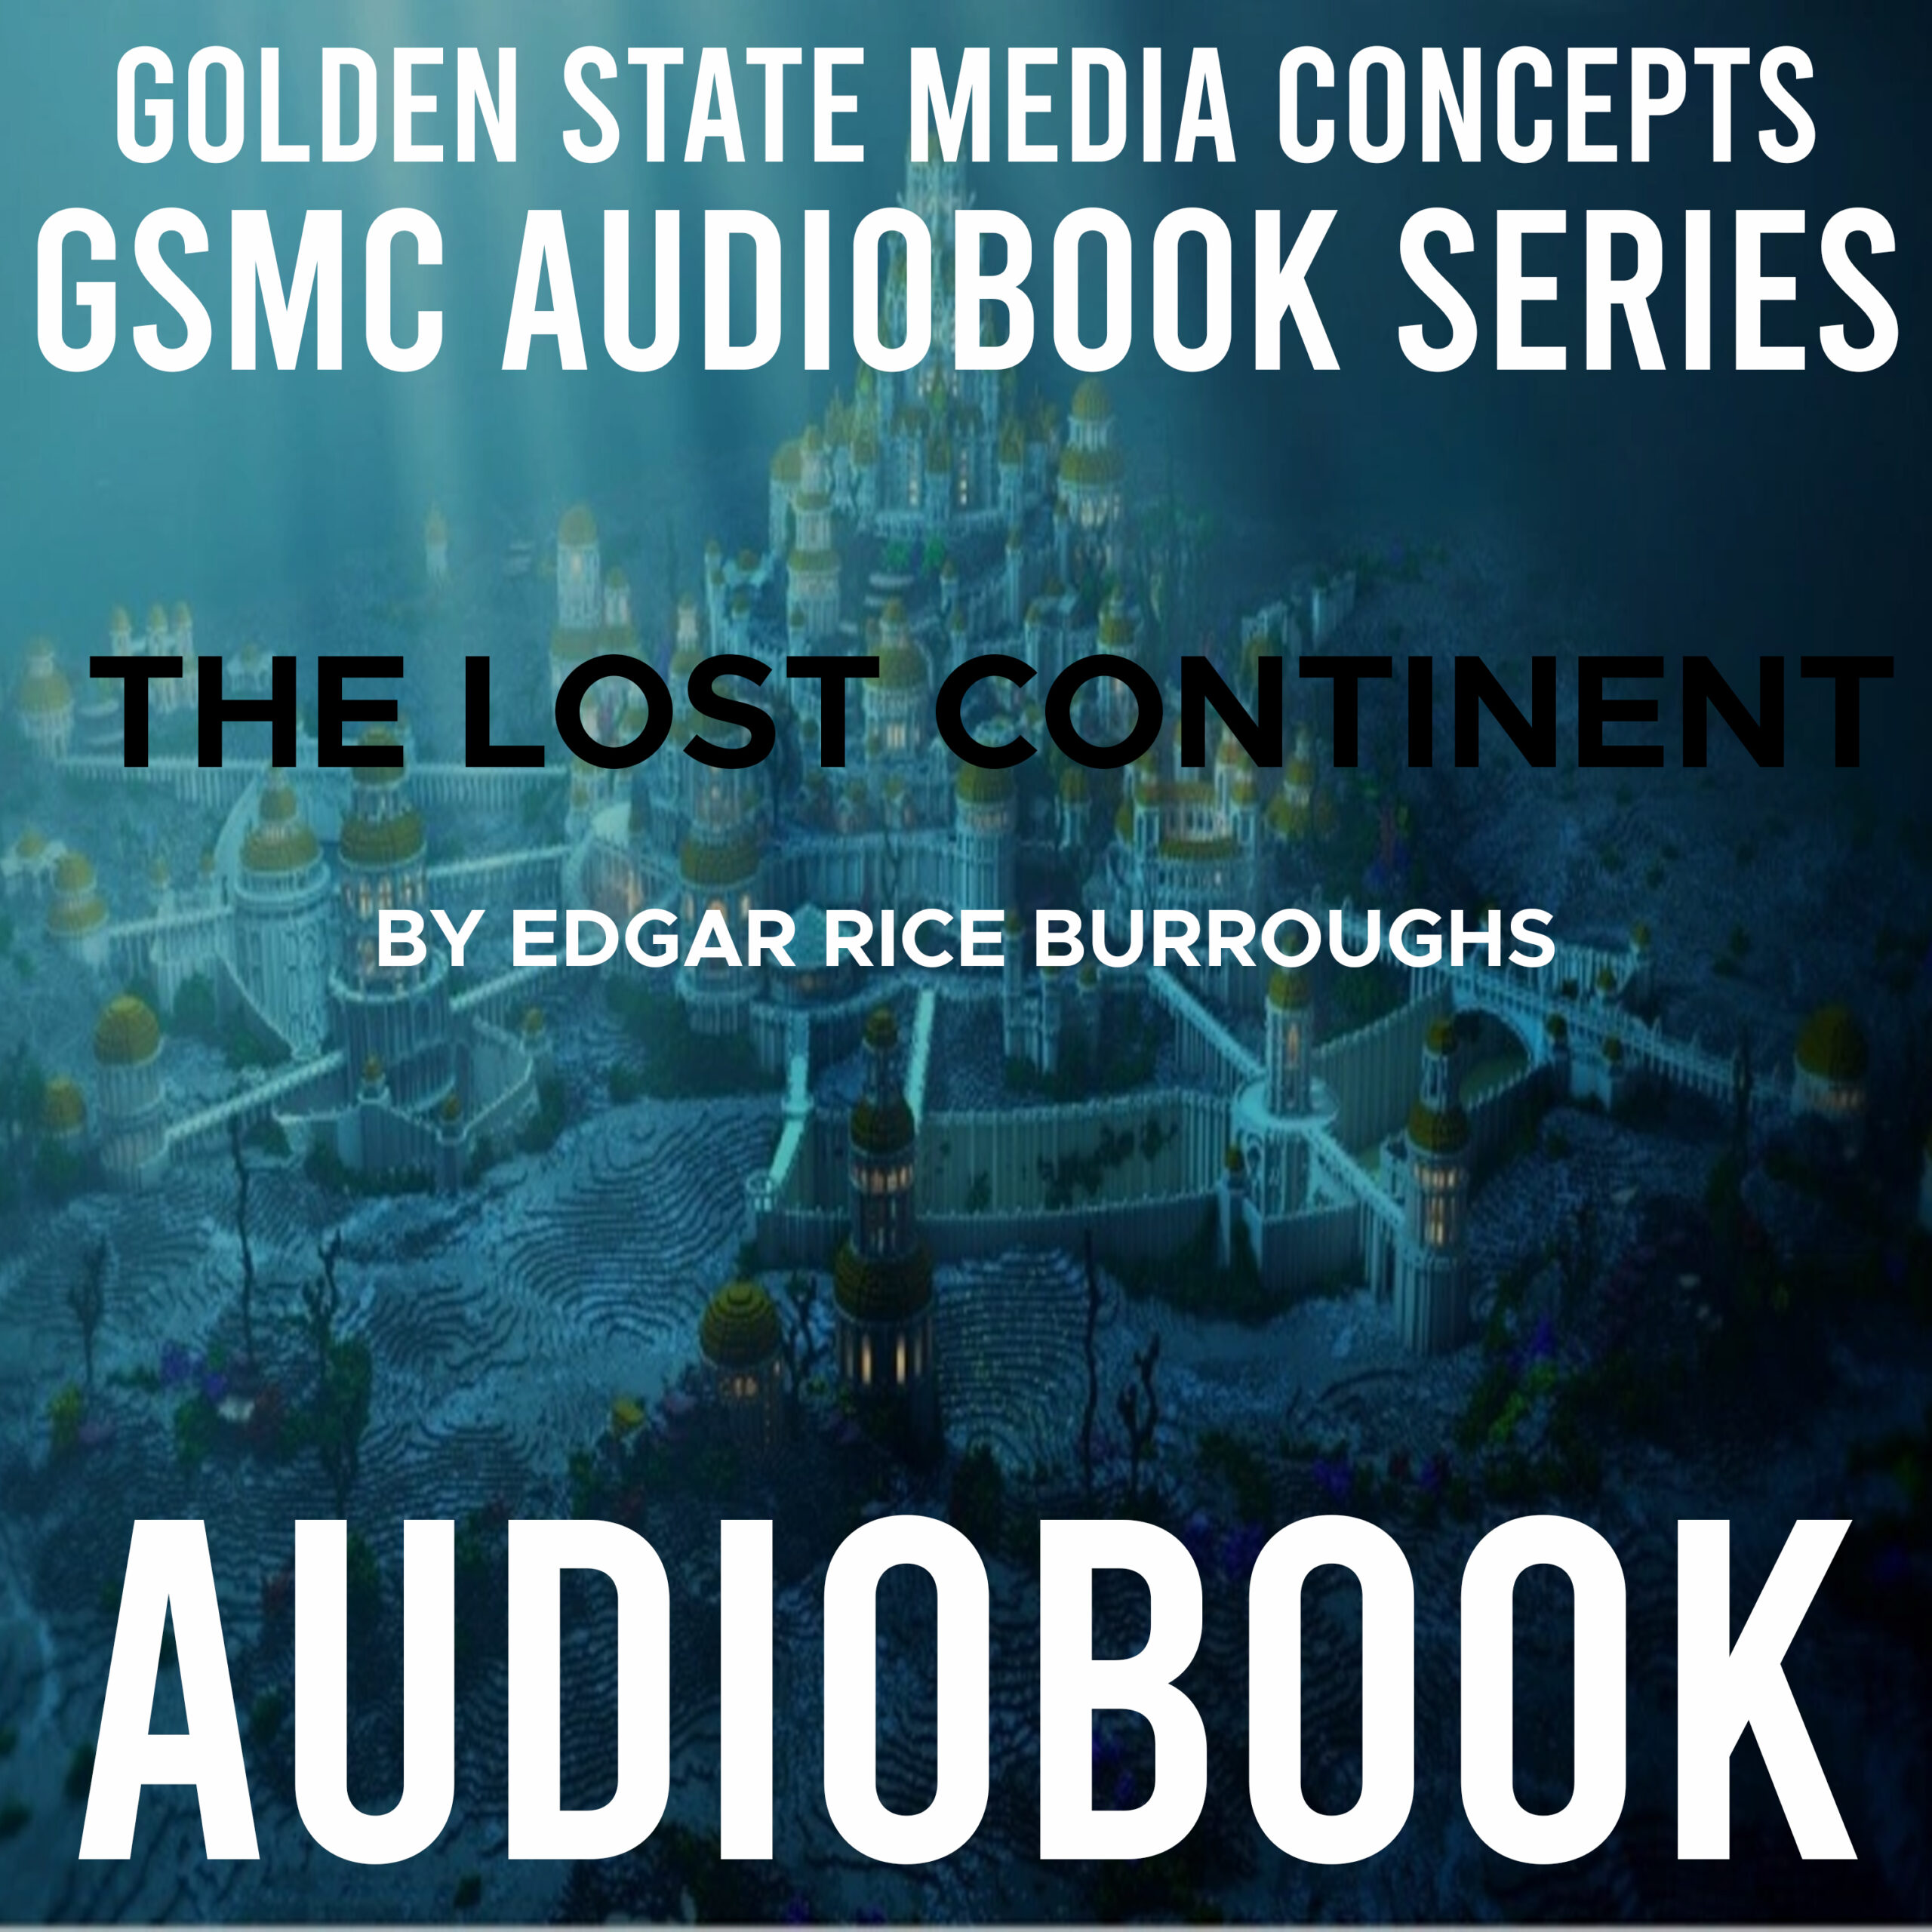 GSMC Audiobook Series: The Lost Continent